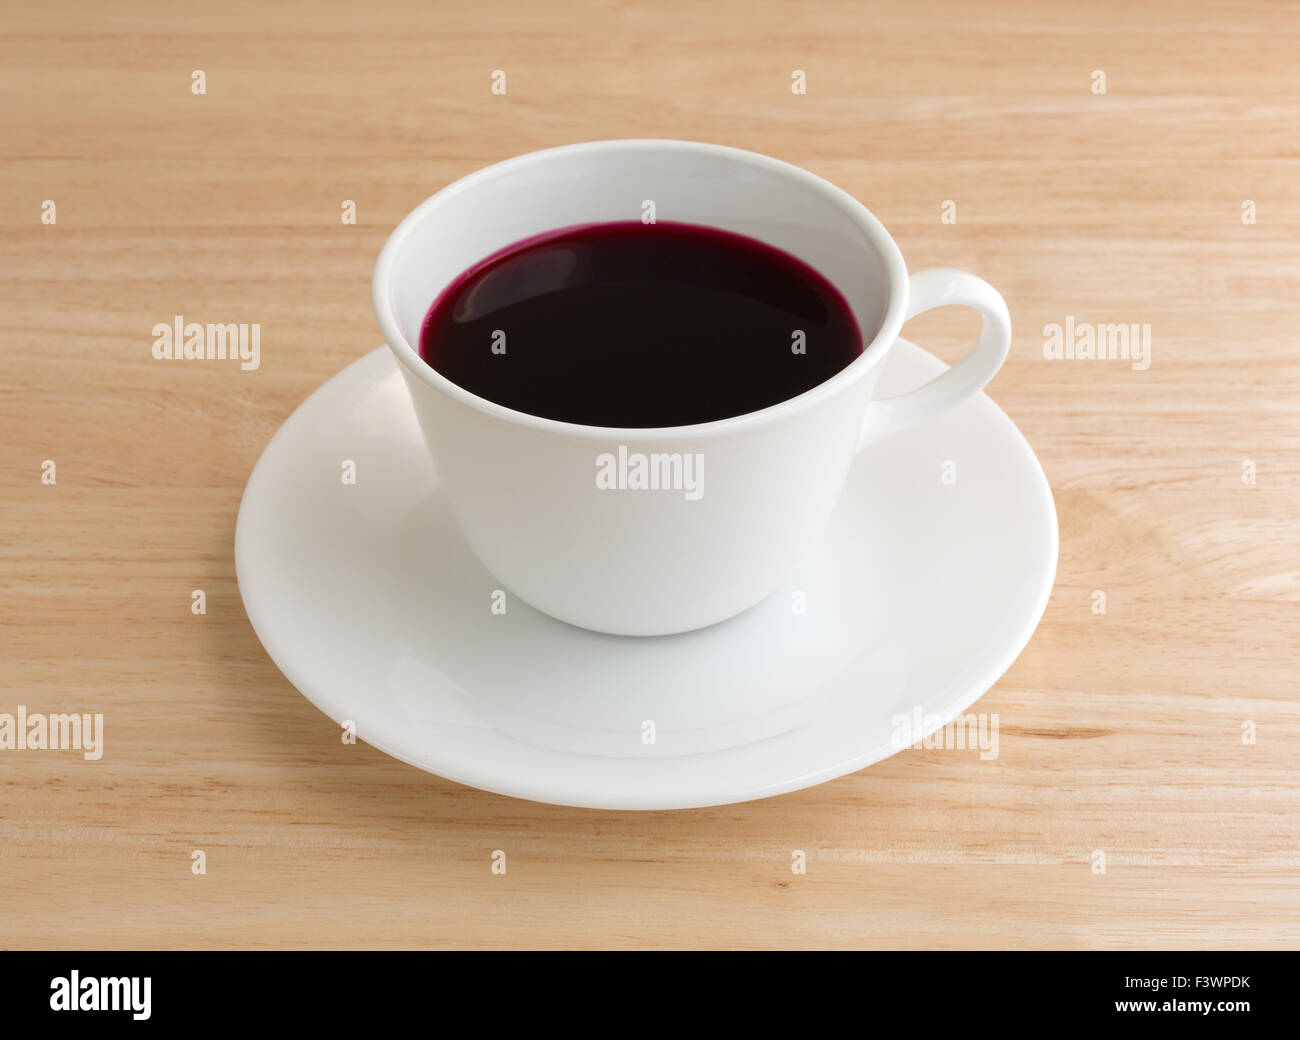 Beet juice in a white coffee cup and saucer atop a wood table top illuminated with natural light. Stock Photo